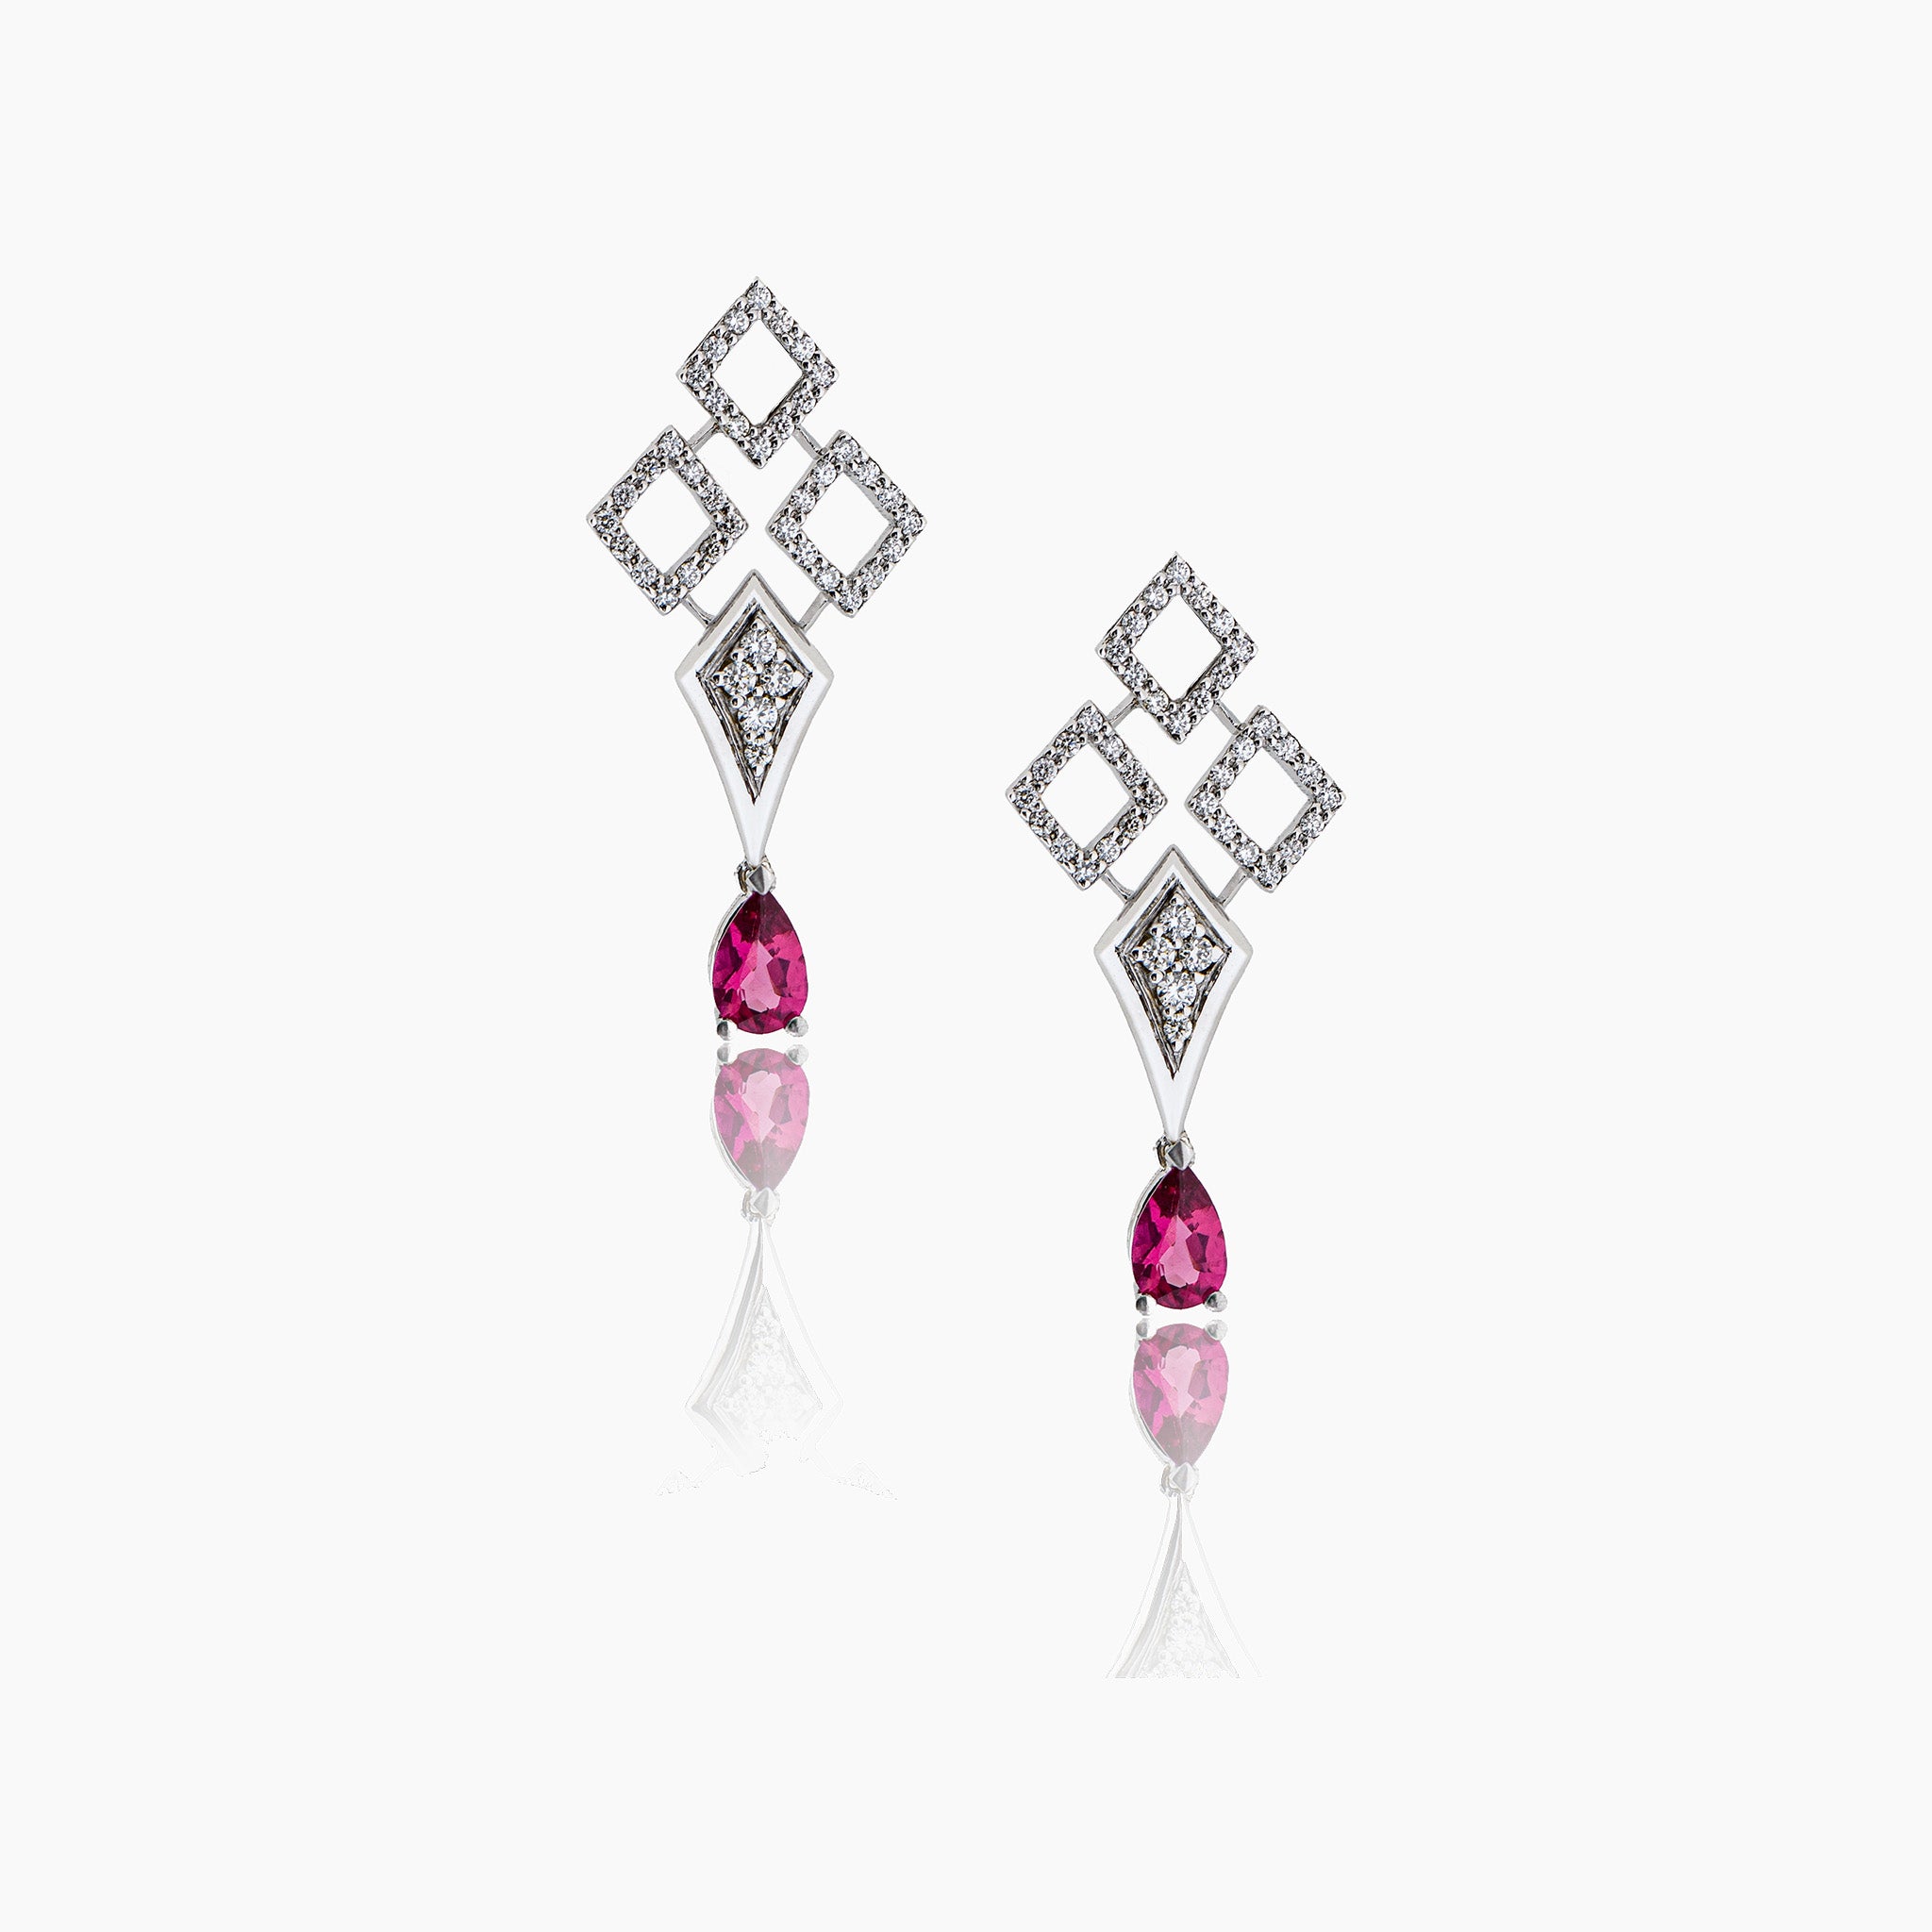 Diamond drop earrings with two stunning rubellite pears, fine jewellery on an off-white background